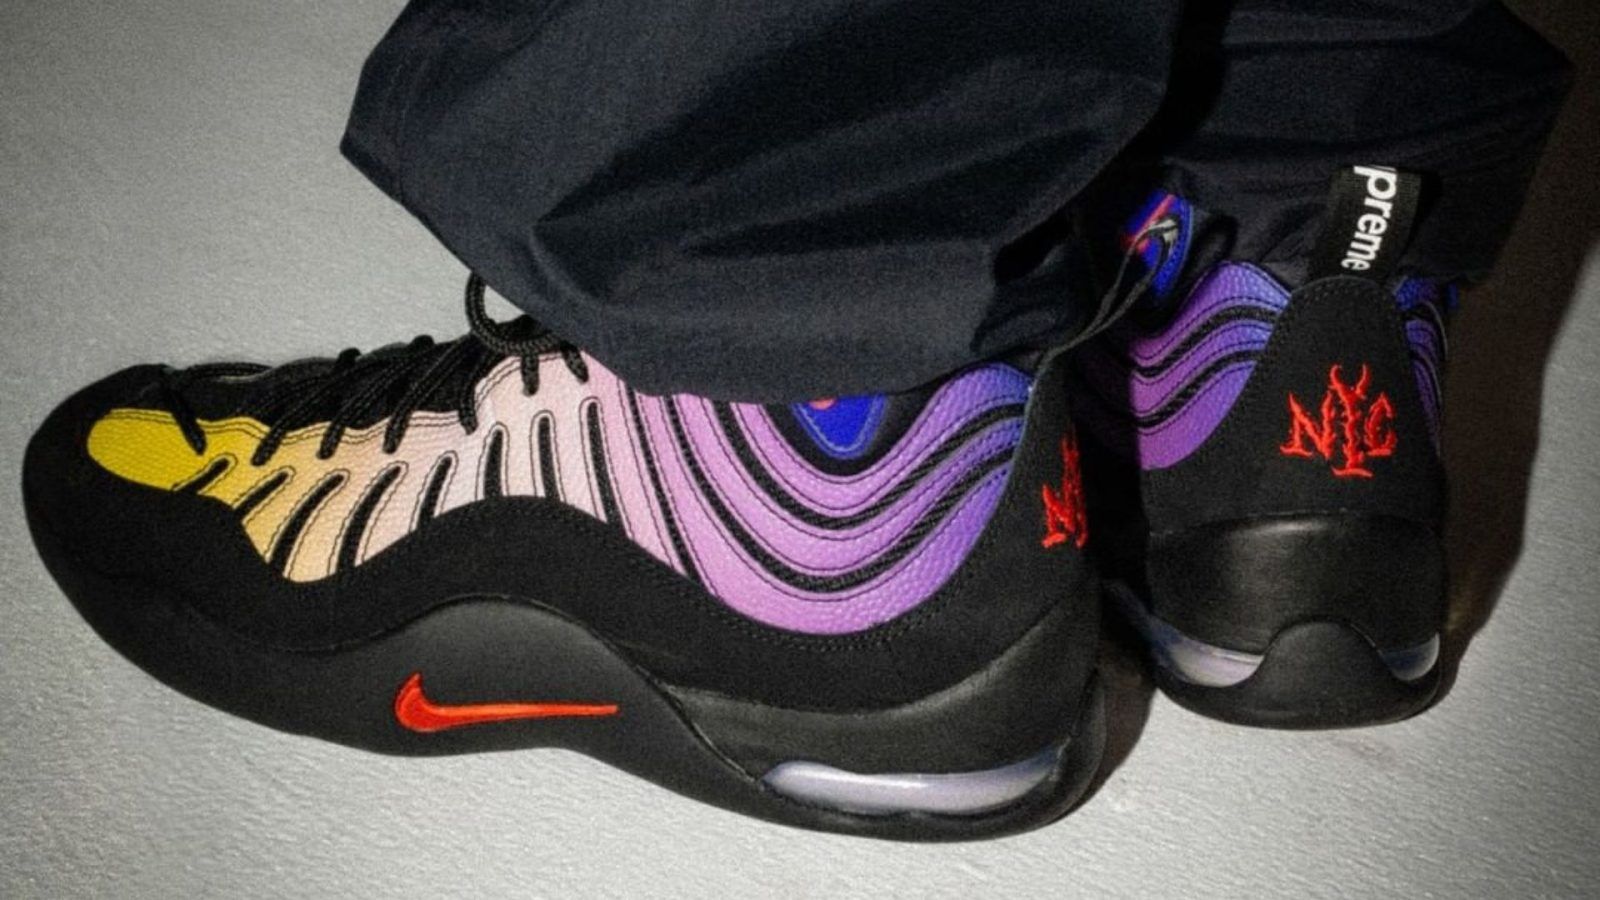 handling Positiv Forbedre Supreme is dropping a Nike Air Bakin collaboration